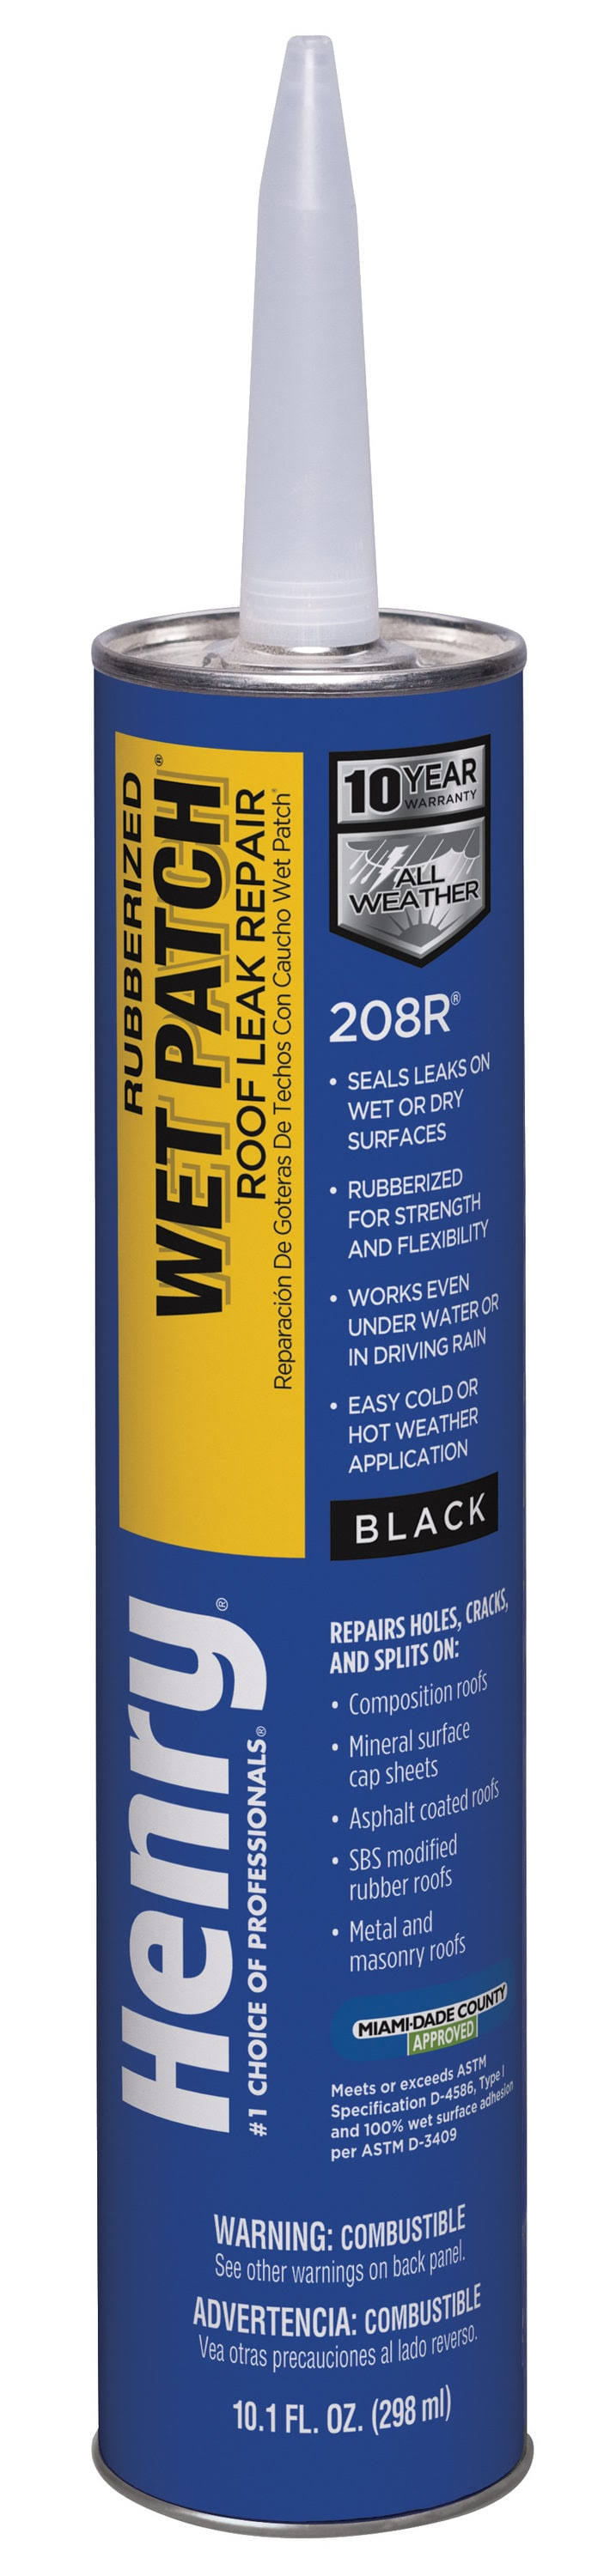 Henry Company Wet Patch Roof Cement - 330ml